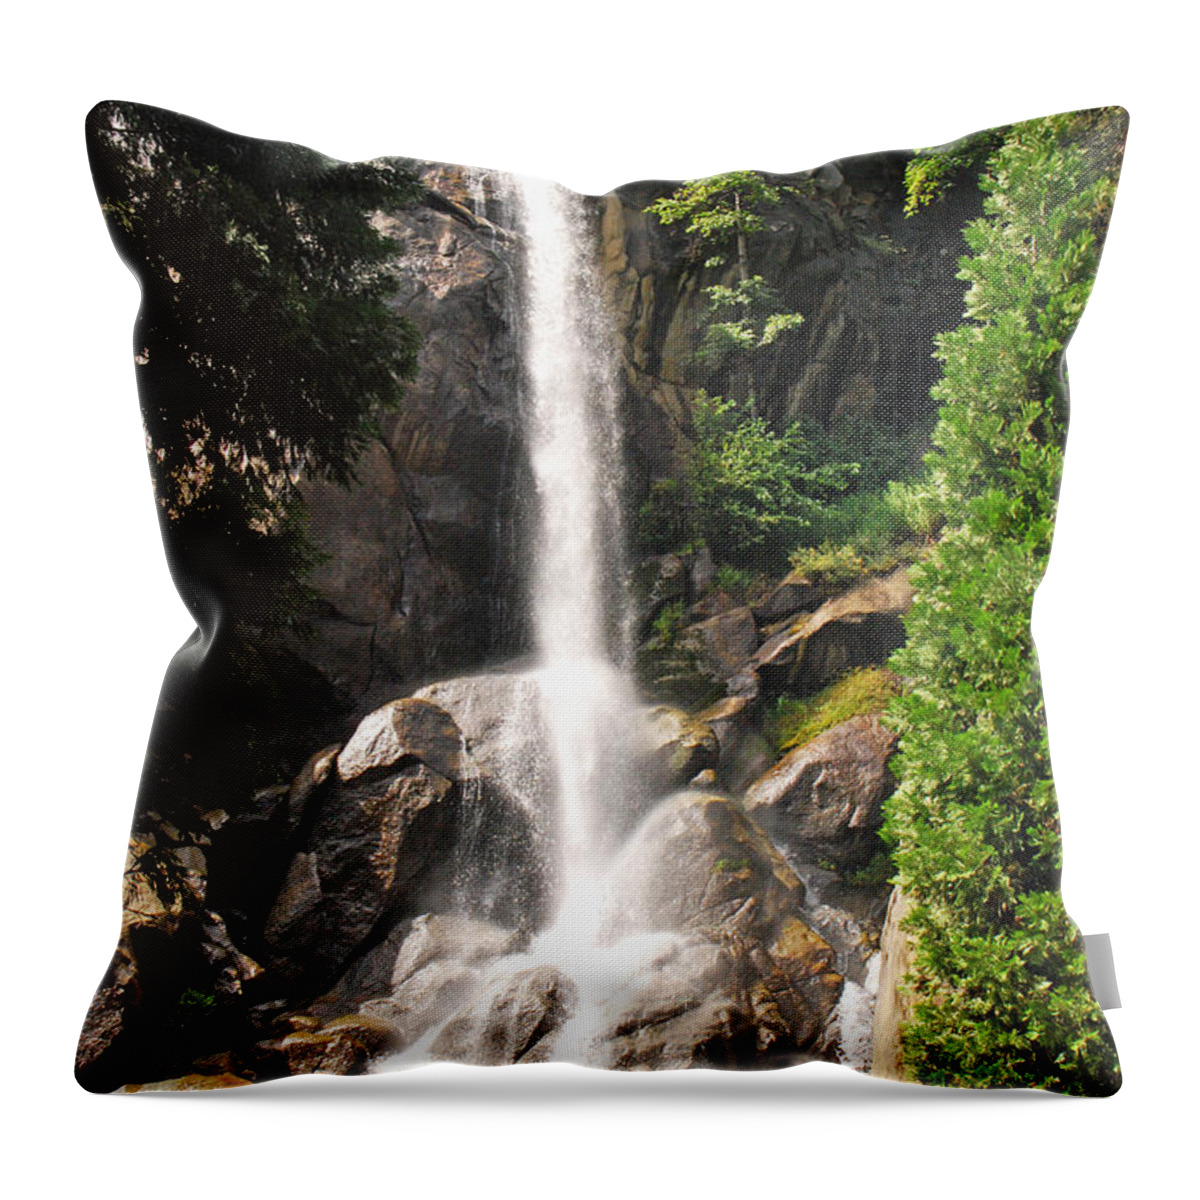 Landscape Throw Pillow featuring the photograph Grizzly Falls by Mary Carol Story